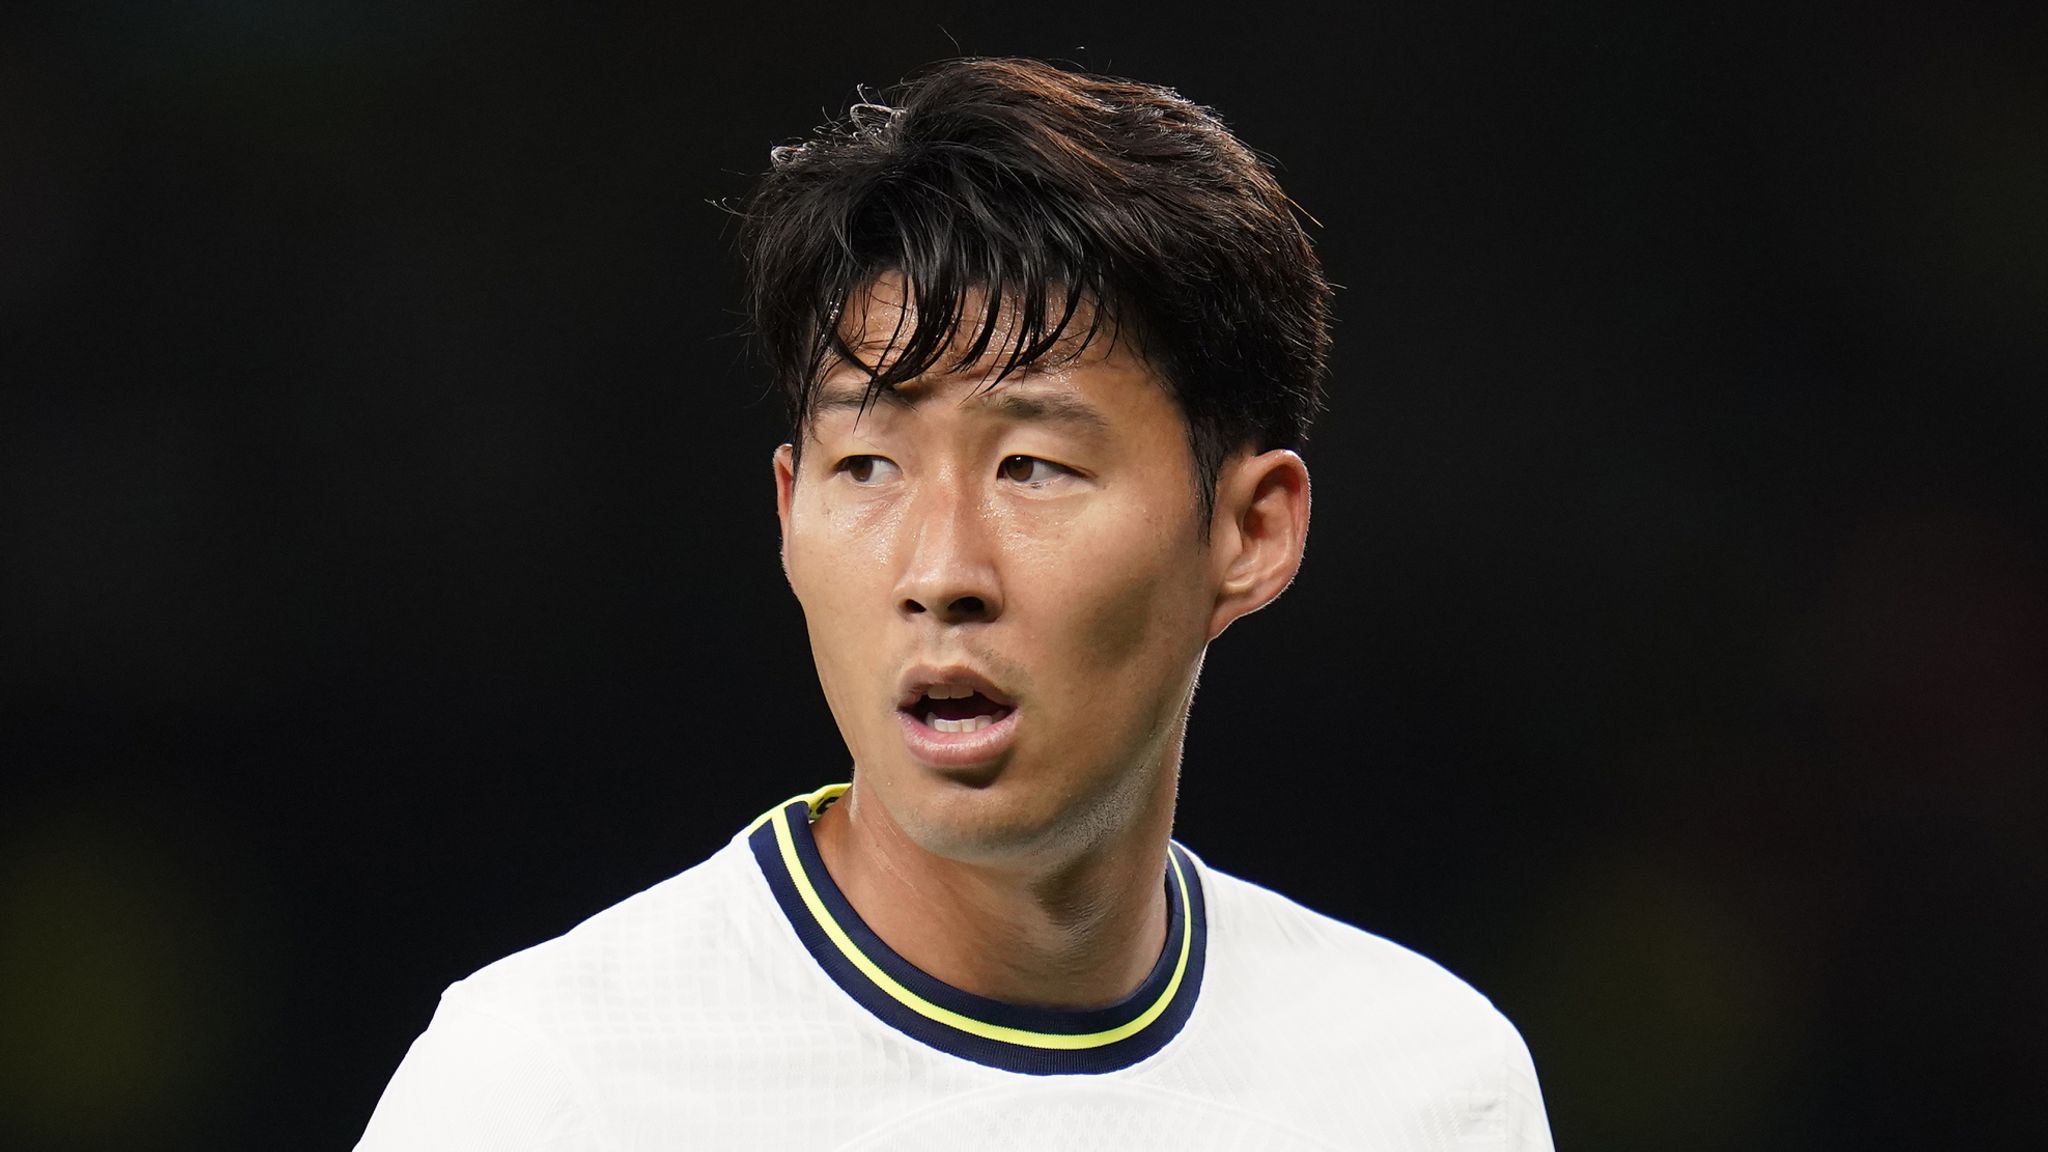 Premier League on X: 🇰🇷 ⚪️ 🔟 Son Heung-min has been involved in 10  goals in his last 11 #PL matches at the Tottenham Hotspur Stadium (6 goals,  4 assists) #TOTAVL